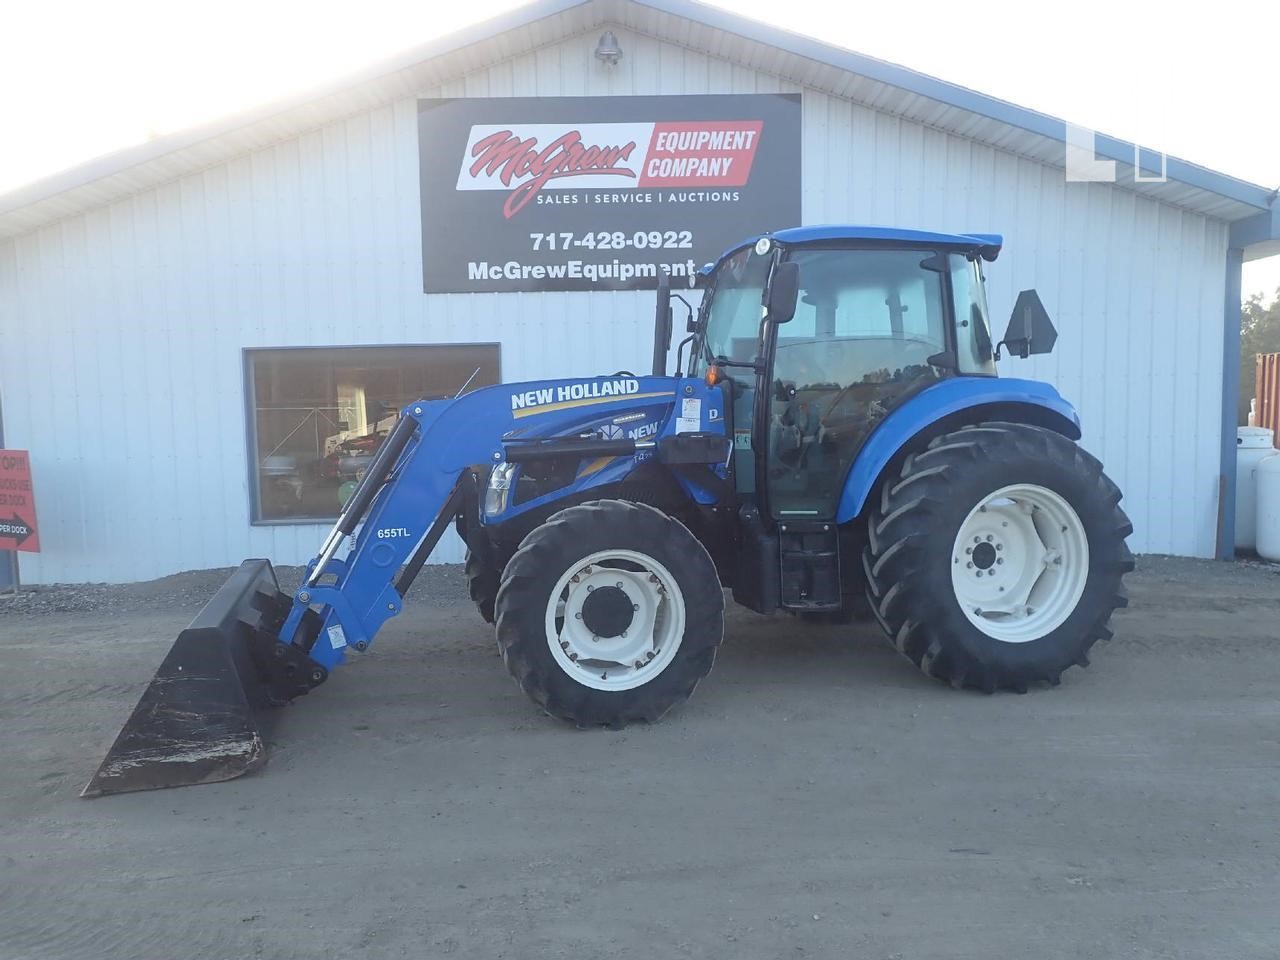 Equipmentfacts Com 12 New Holland T4 75 Online Auctions